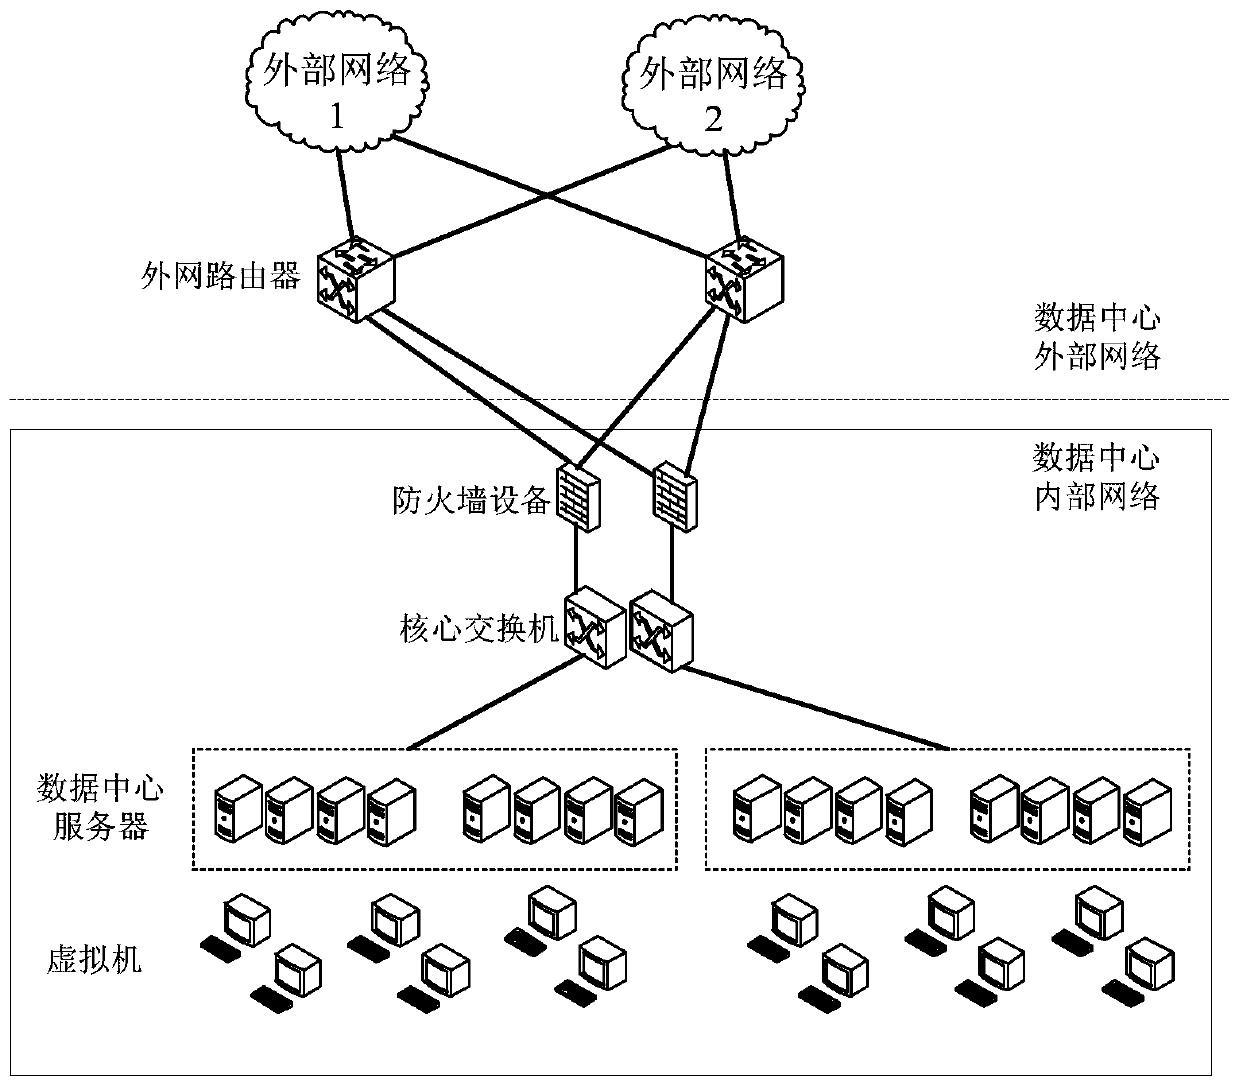 Network processing method, cloud platform and software-defined network sdn controller